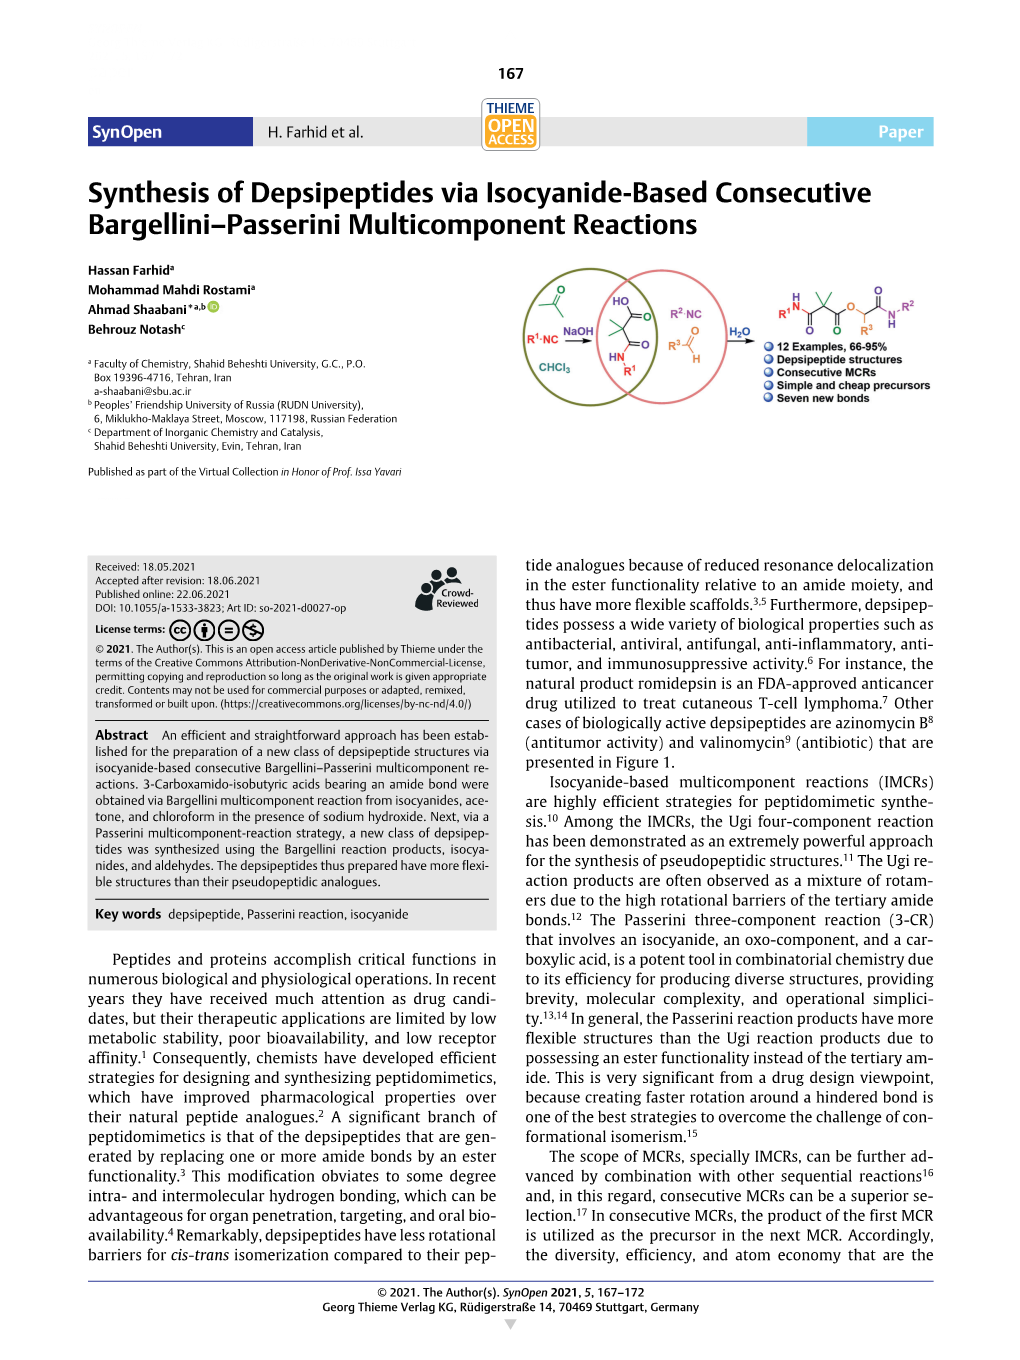 Synthesis of Depsipeptides Via Isocyanide-Based Consecutive Bargellini–Passerini Multicomponent Reactions